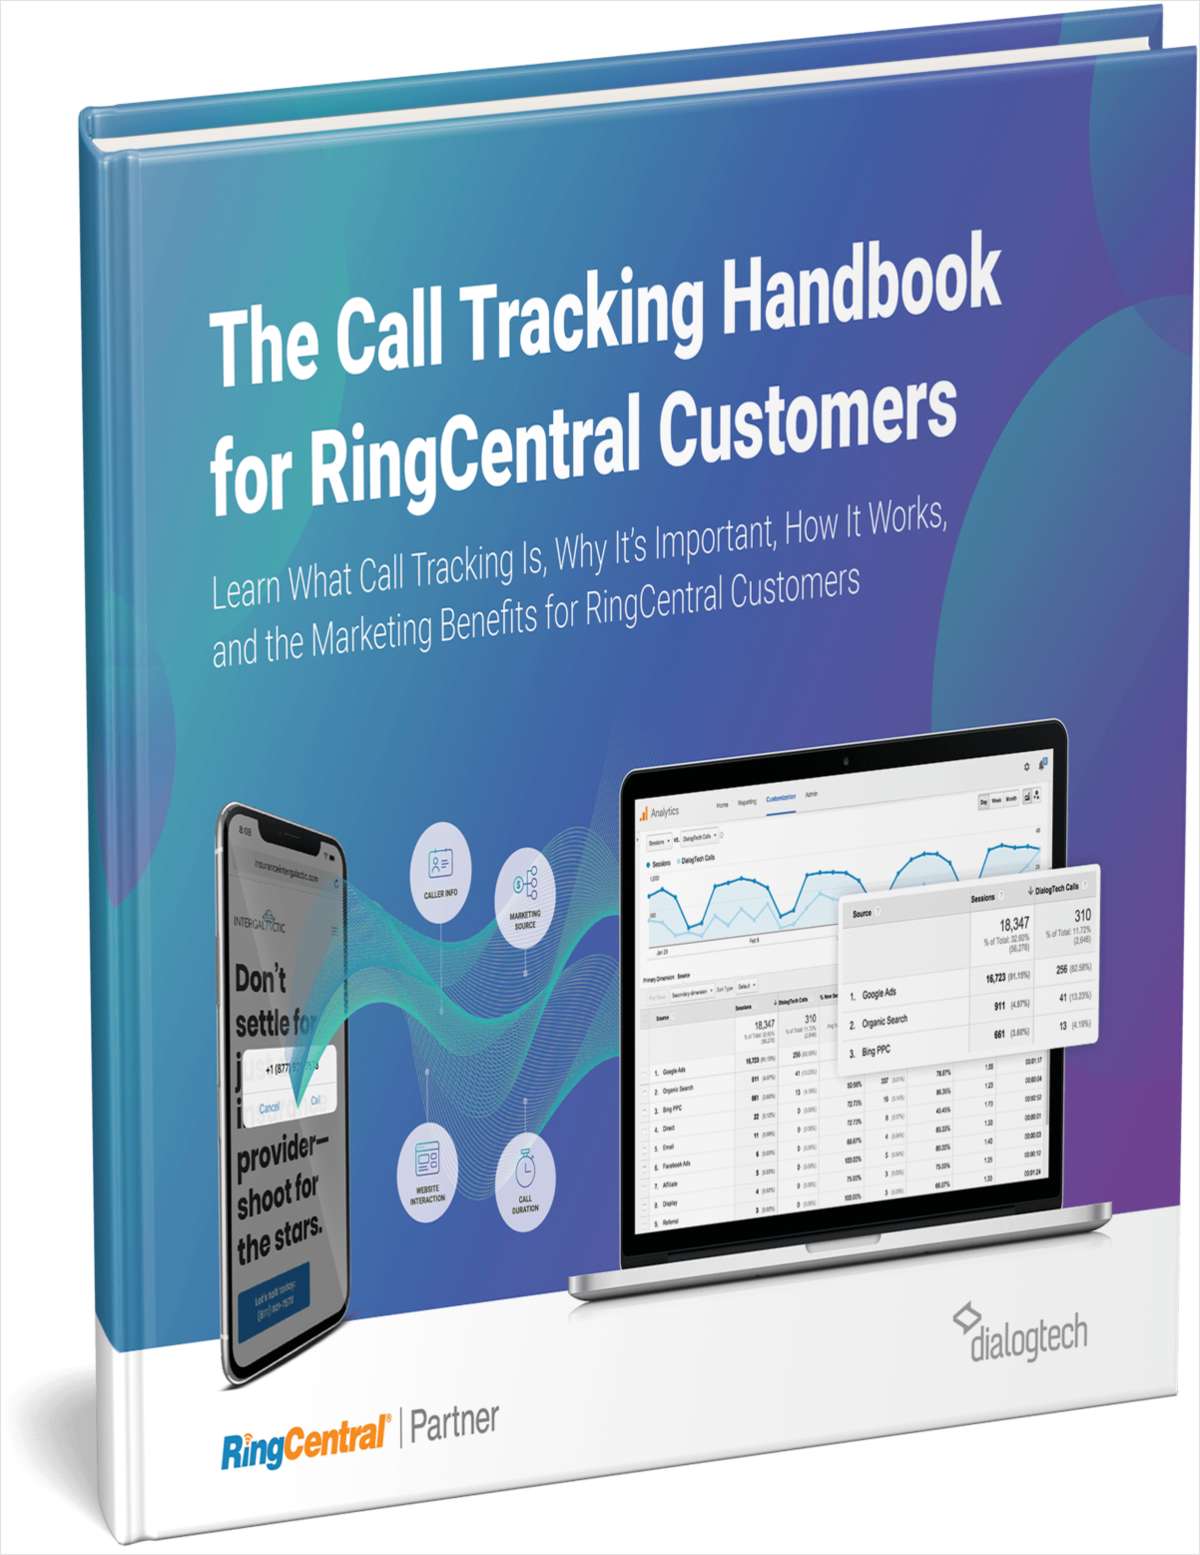 The Call Tracking Handbook for RingCentral Customers